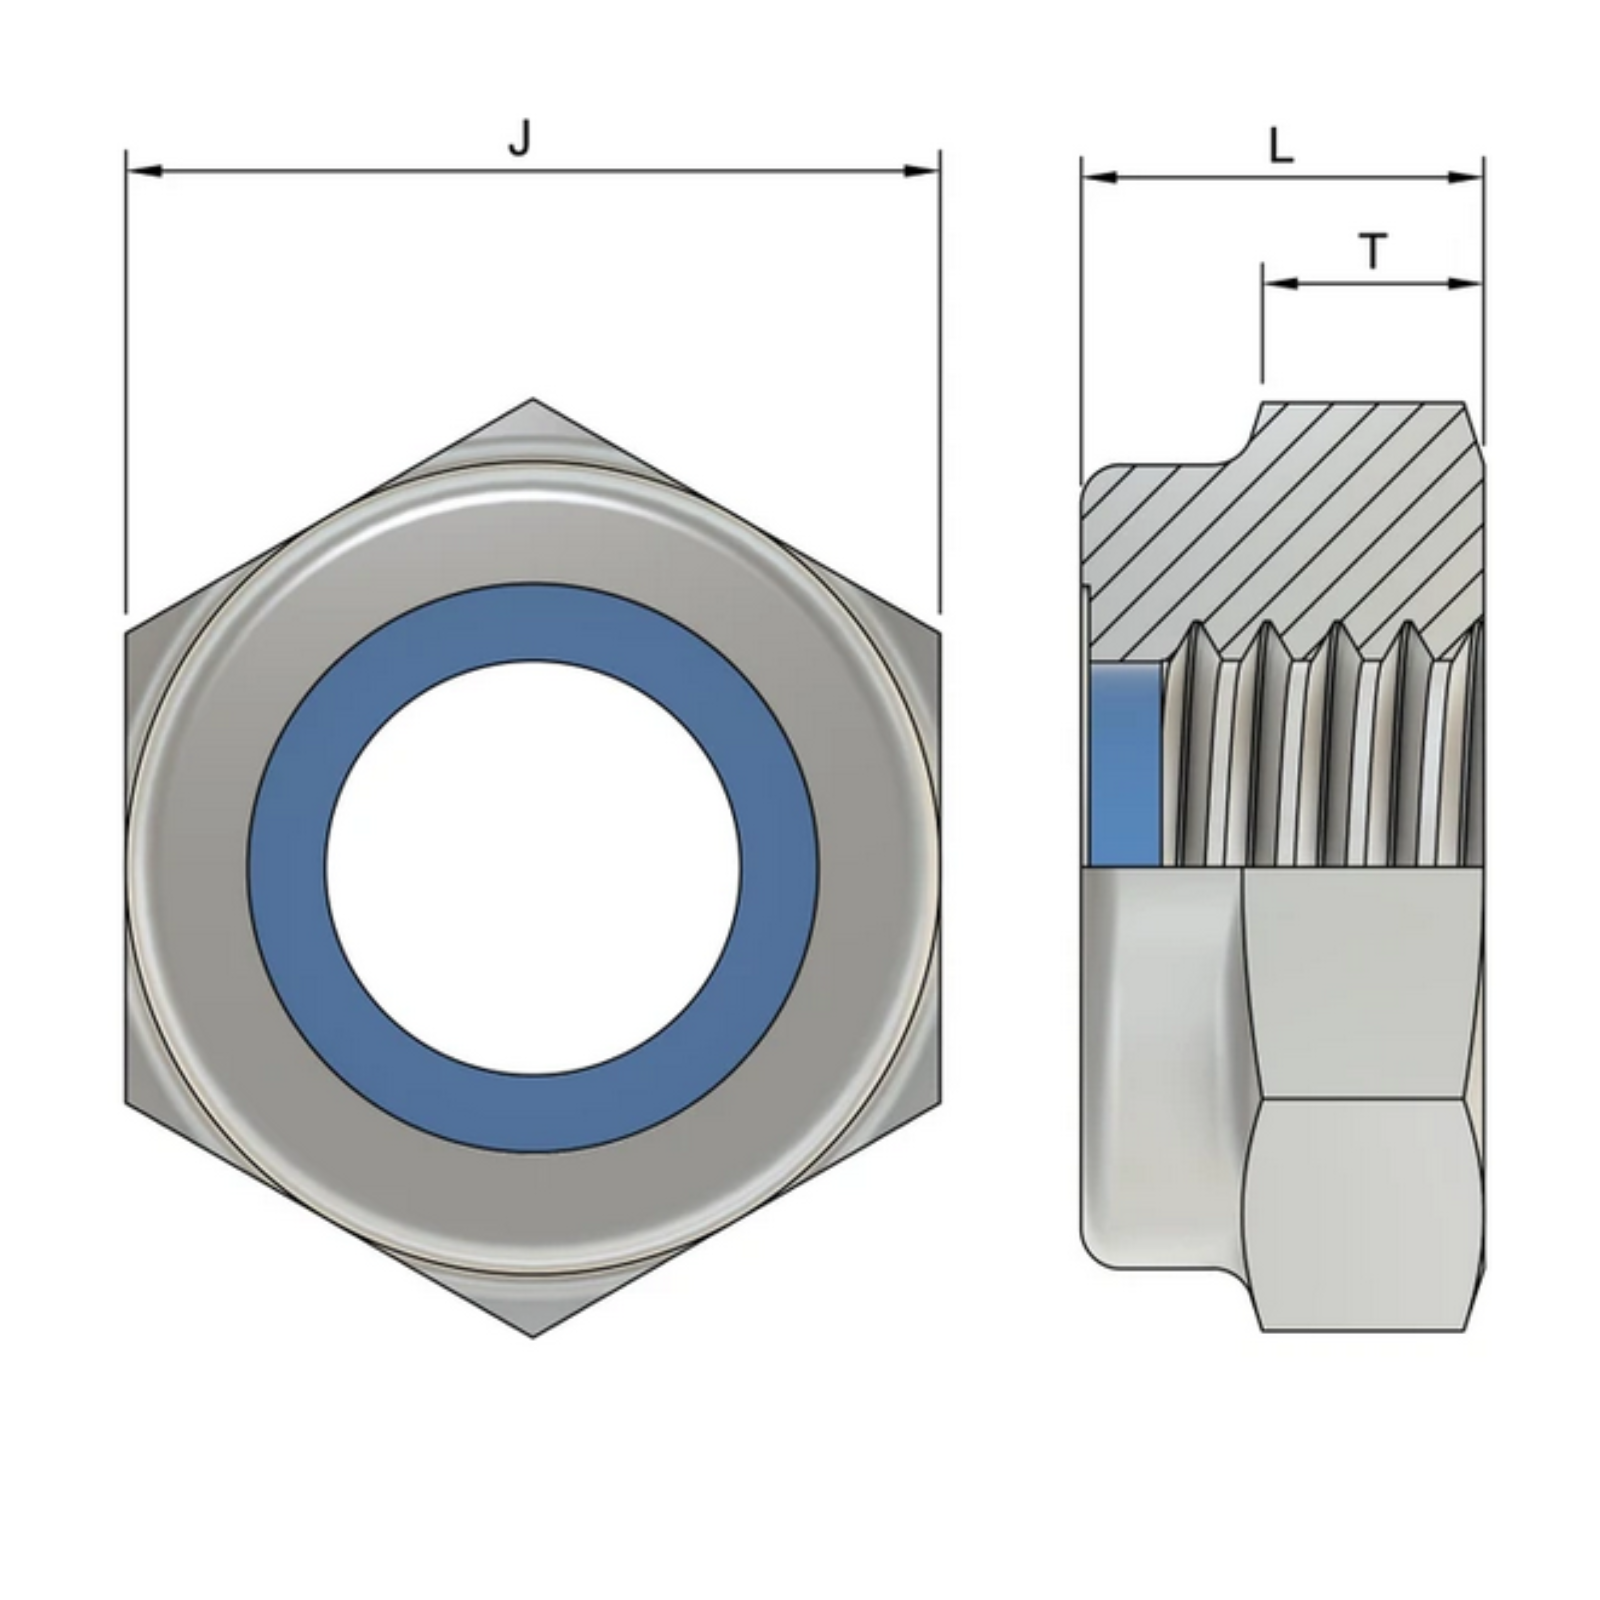 M10 Hexagon Nylon Locking Nuts (DIN 985) - Stainless Steel (A2)